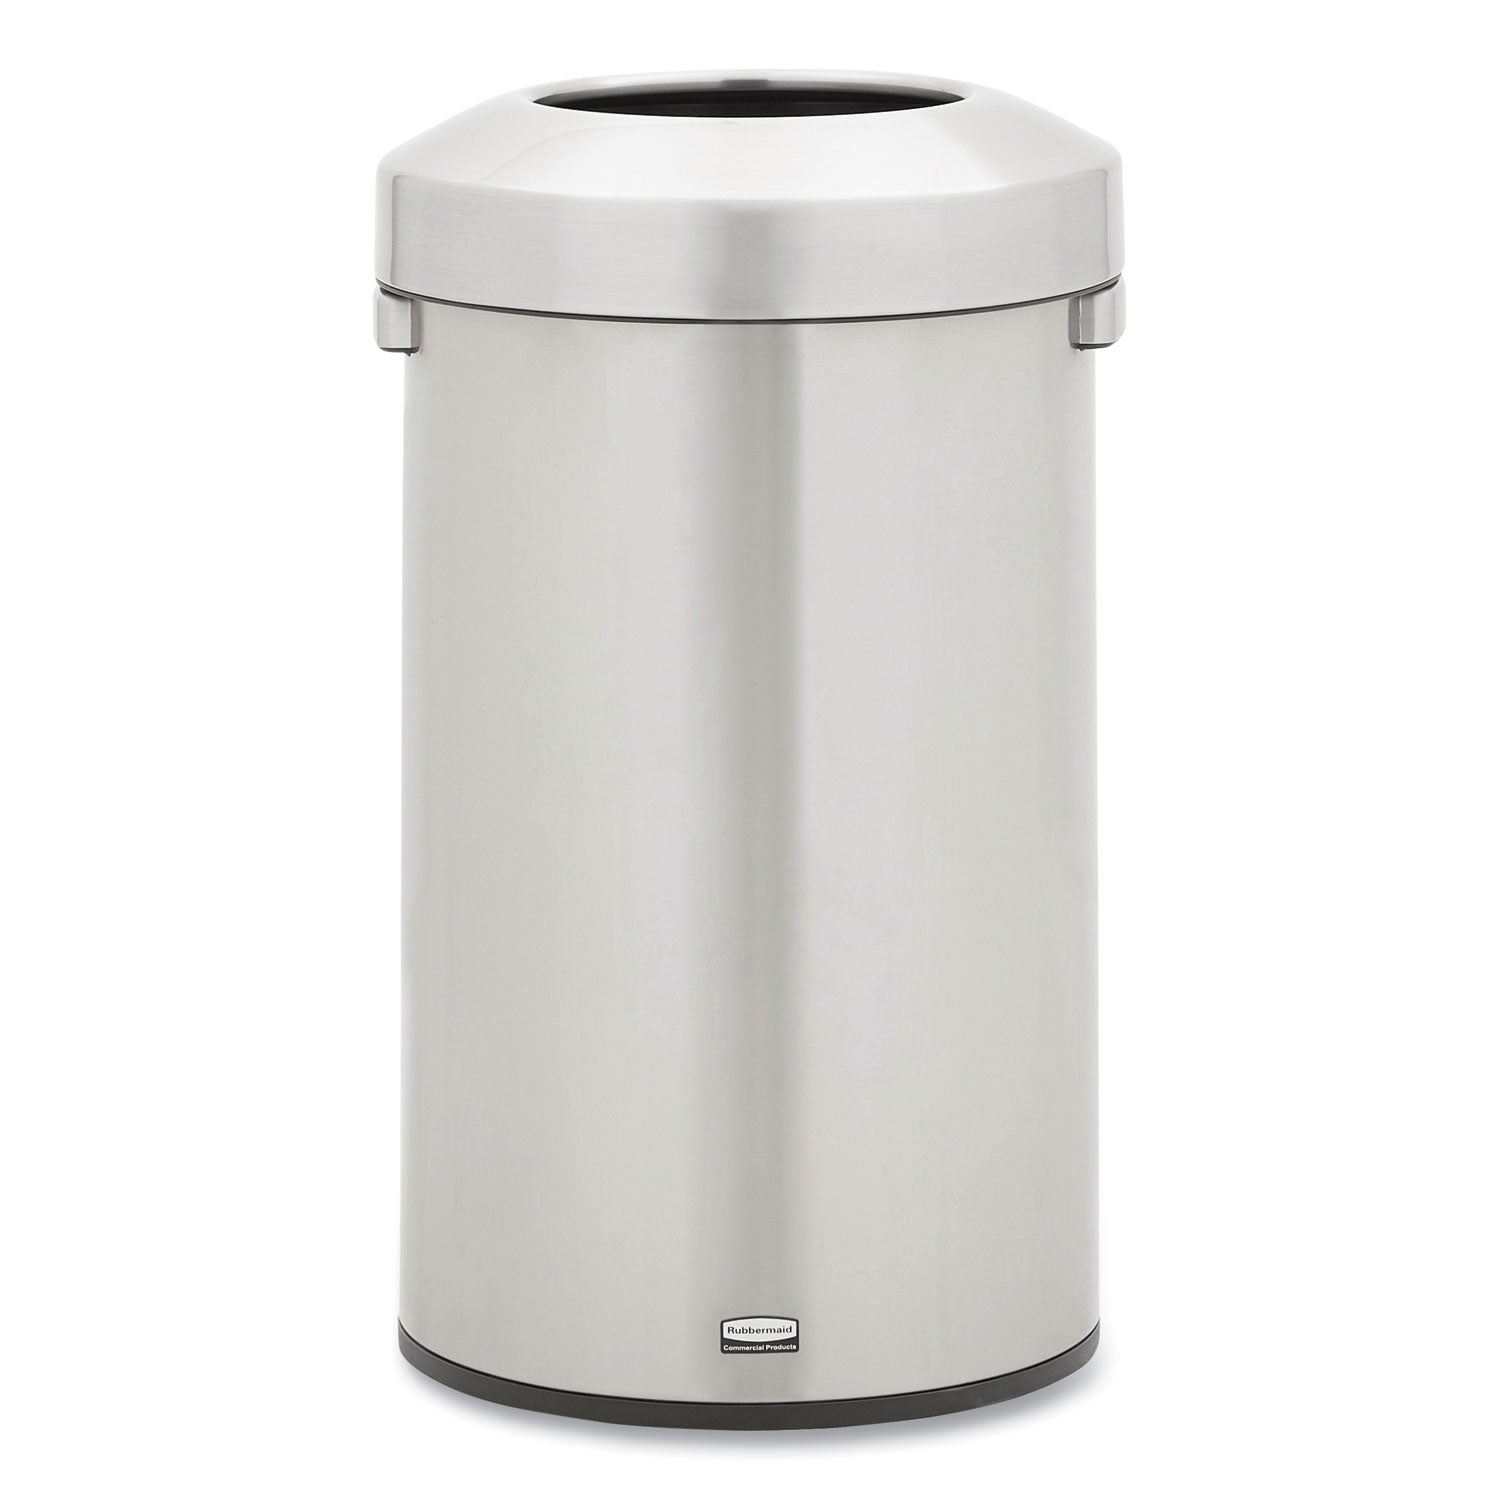 Rubbermaid Commercial Refine Waste Container - 23 gal Capacity - Round - Ergonomic Handle, Non-skid, Fingerprint Resistant, Durable - 29.6" Height x 17.7" Width - Metal - Stainless Steel - 1 Each - 1